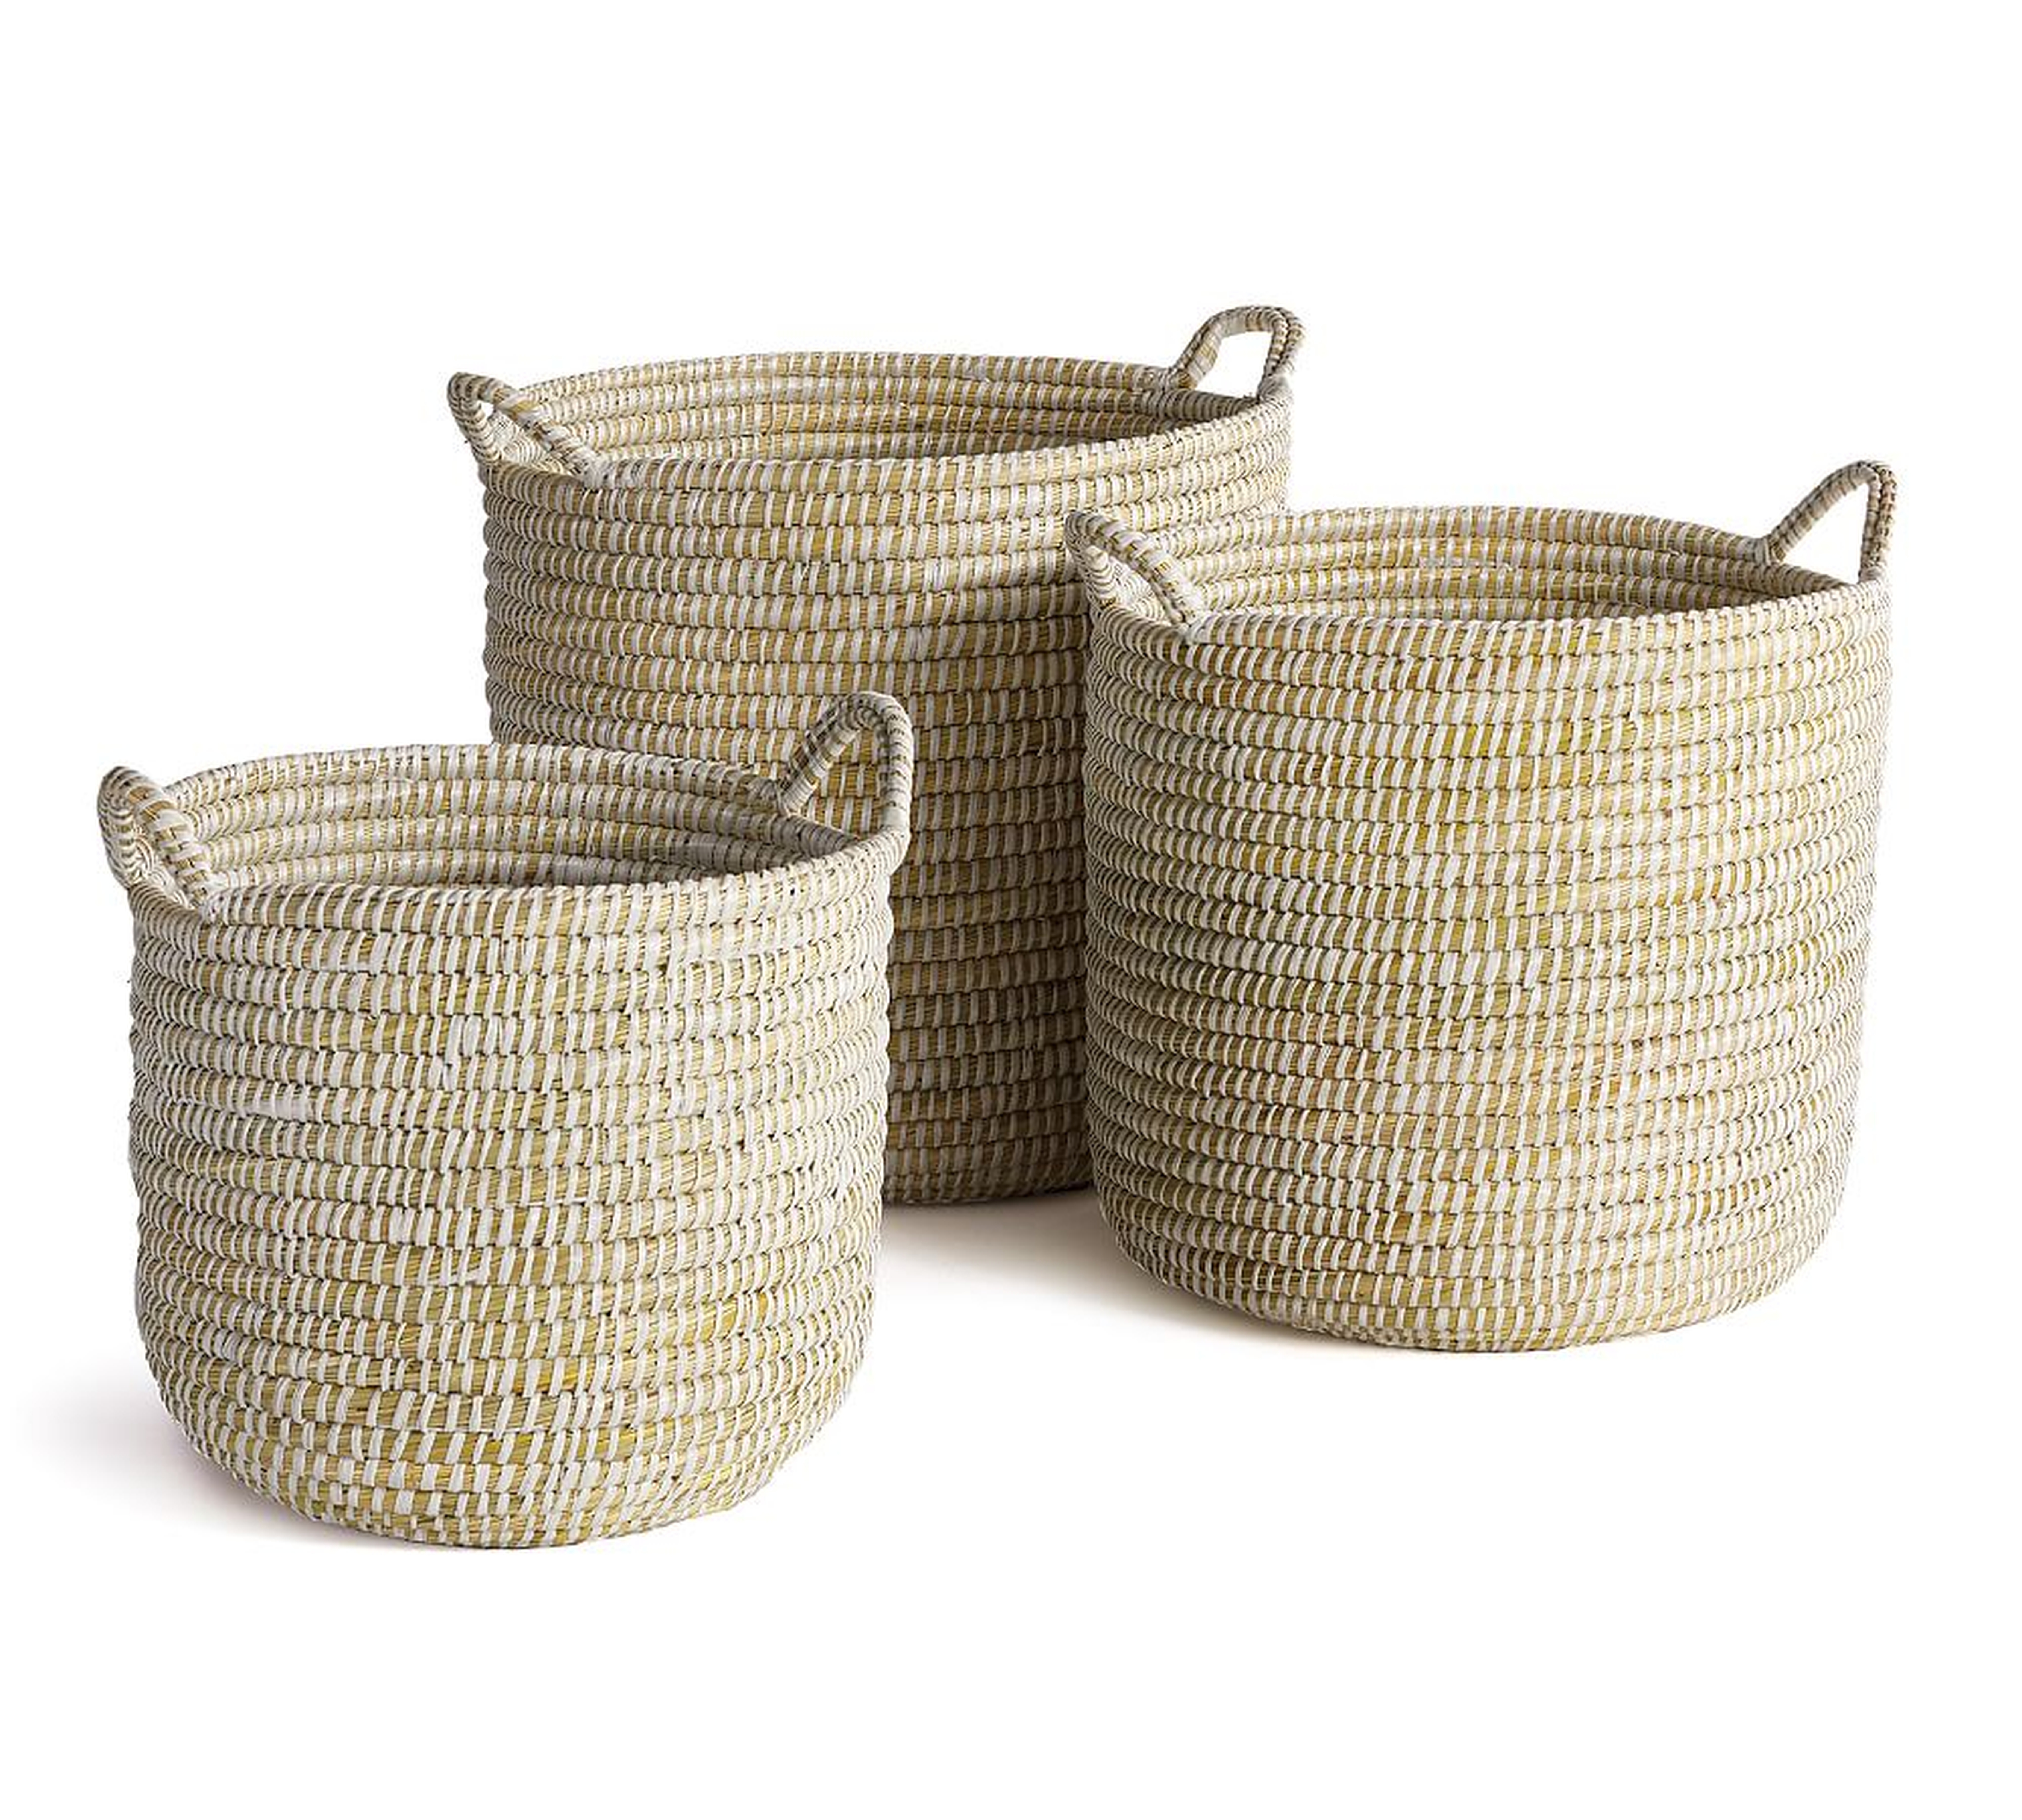 Dahlia White Rivergrass Baskets With Handles, Set of 3 - Pottery Barn